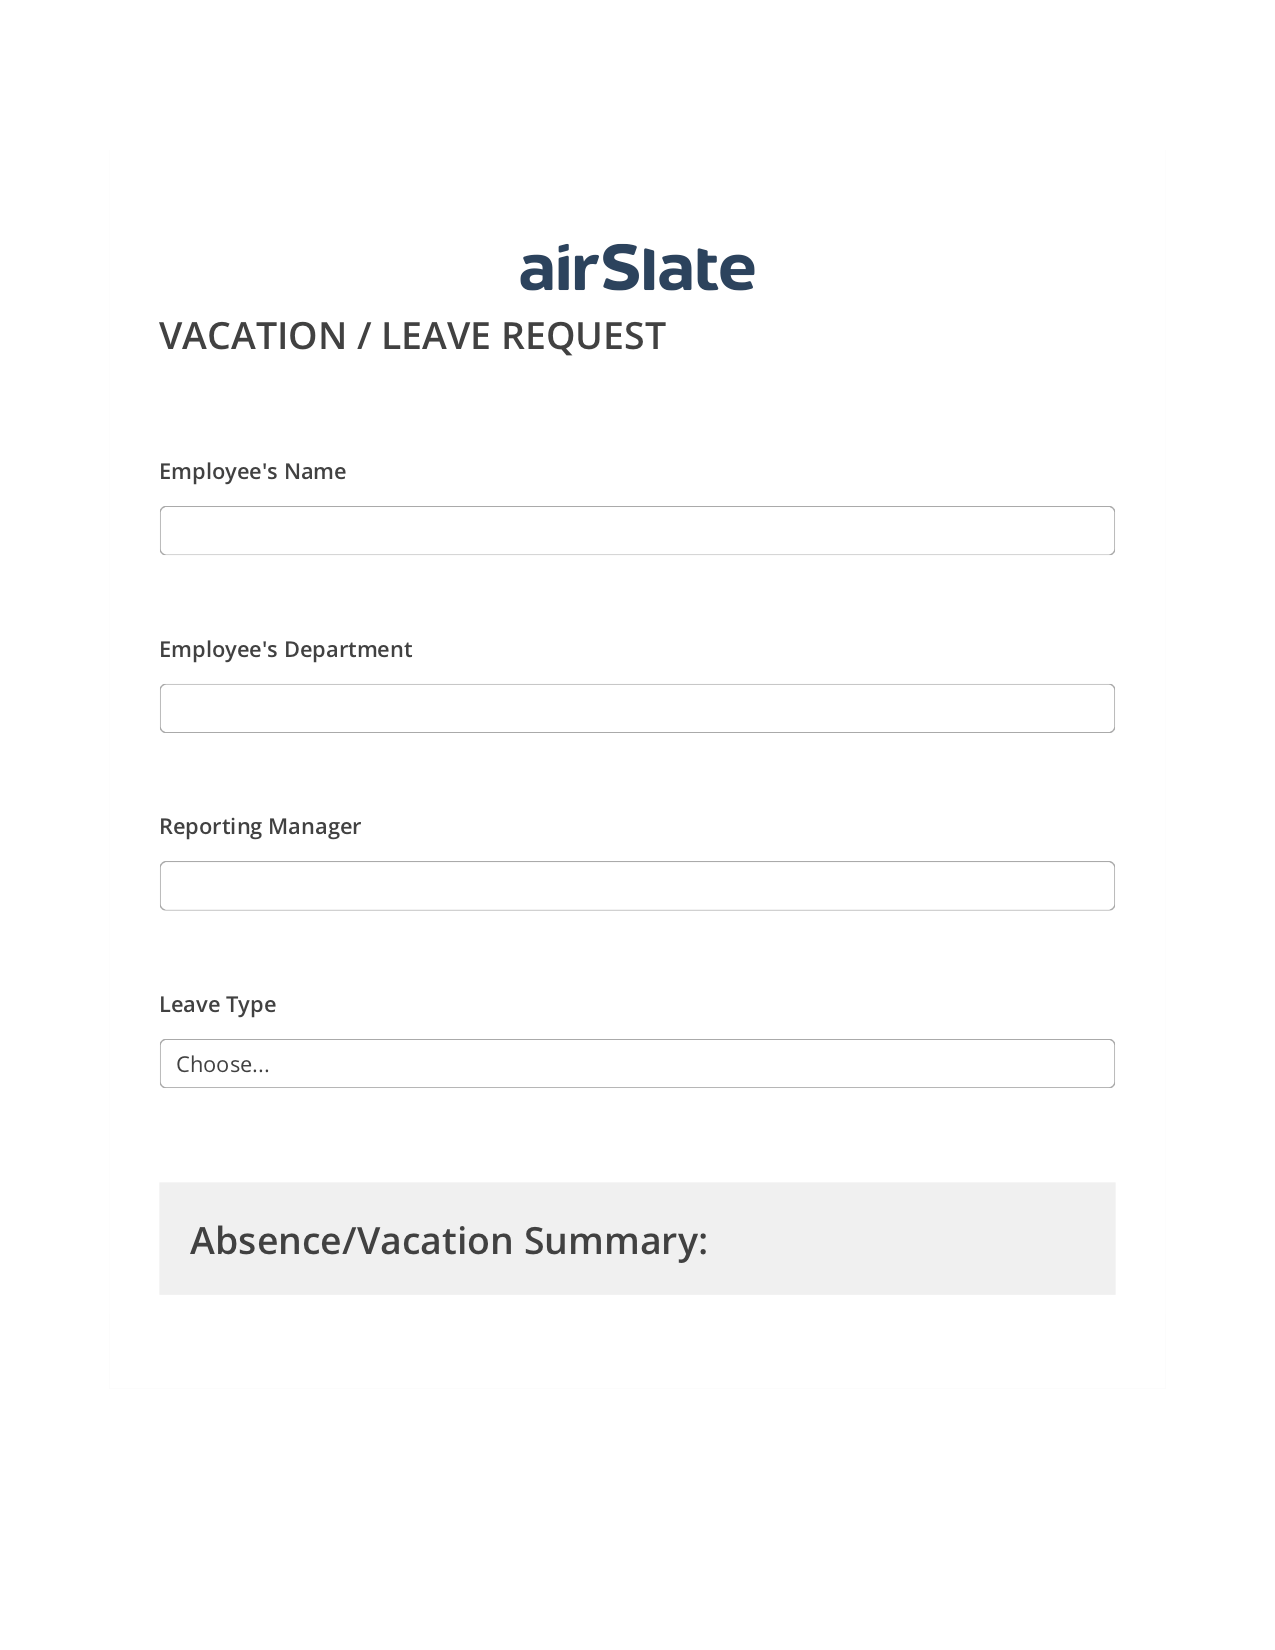 Multirole Vacation/Leave Request Workflow Pre-fill Dropdowns from Google Sheet Bot, Remove Tags From Slate Bot, Export to Google Sheet Bot